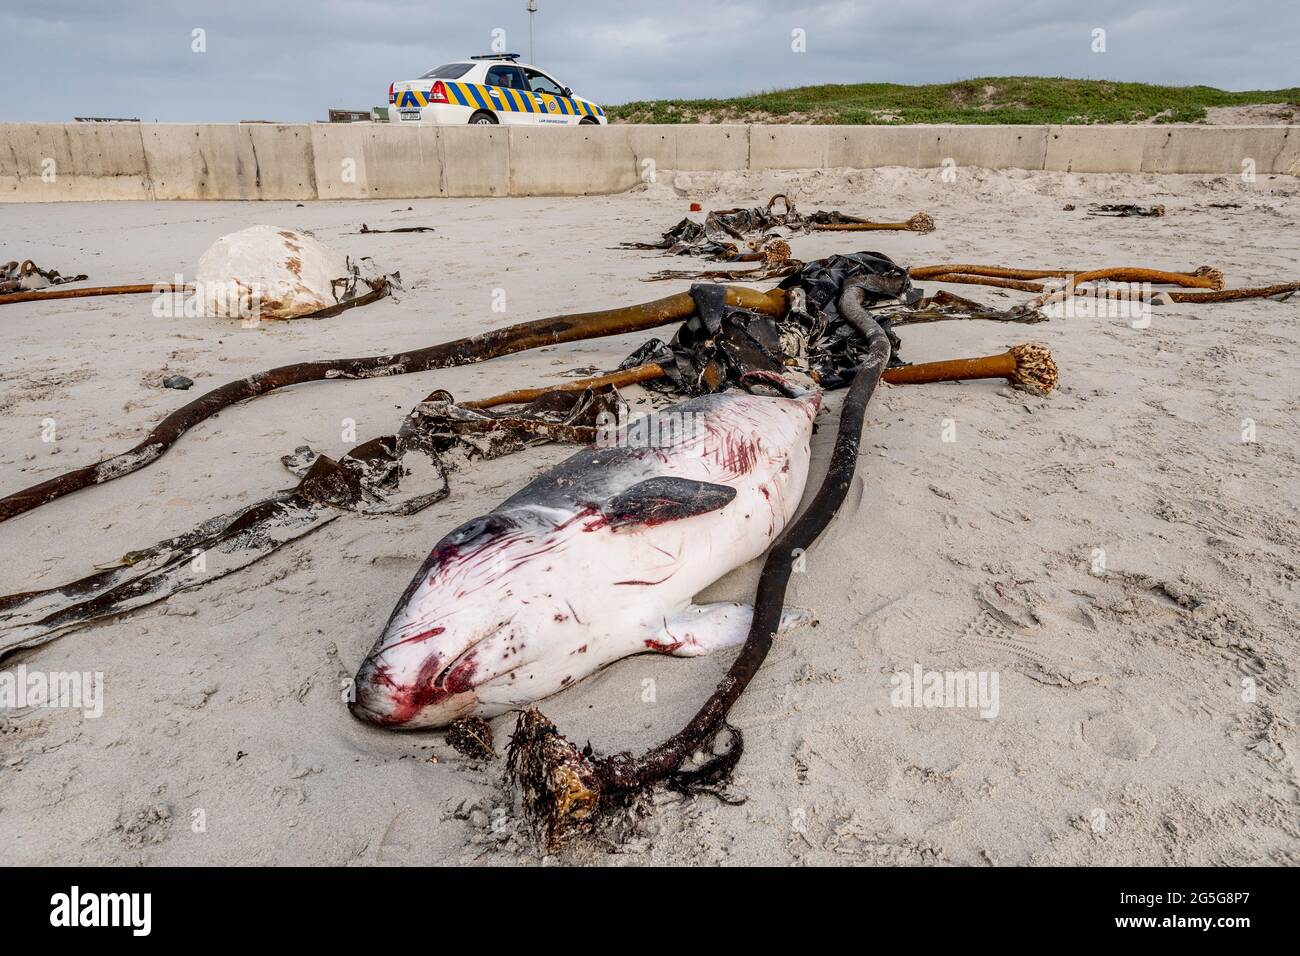 Carcass of a juvenile Pygmy Sperm Whale (Kogia breviceps) on beach at Witsands, near Misty Cliffs, Cape Peninsula, South Africa. Cetacean stranding. Stock Photo